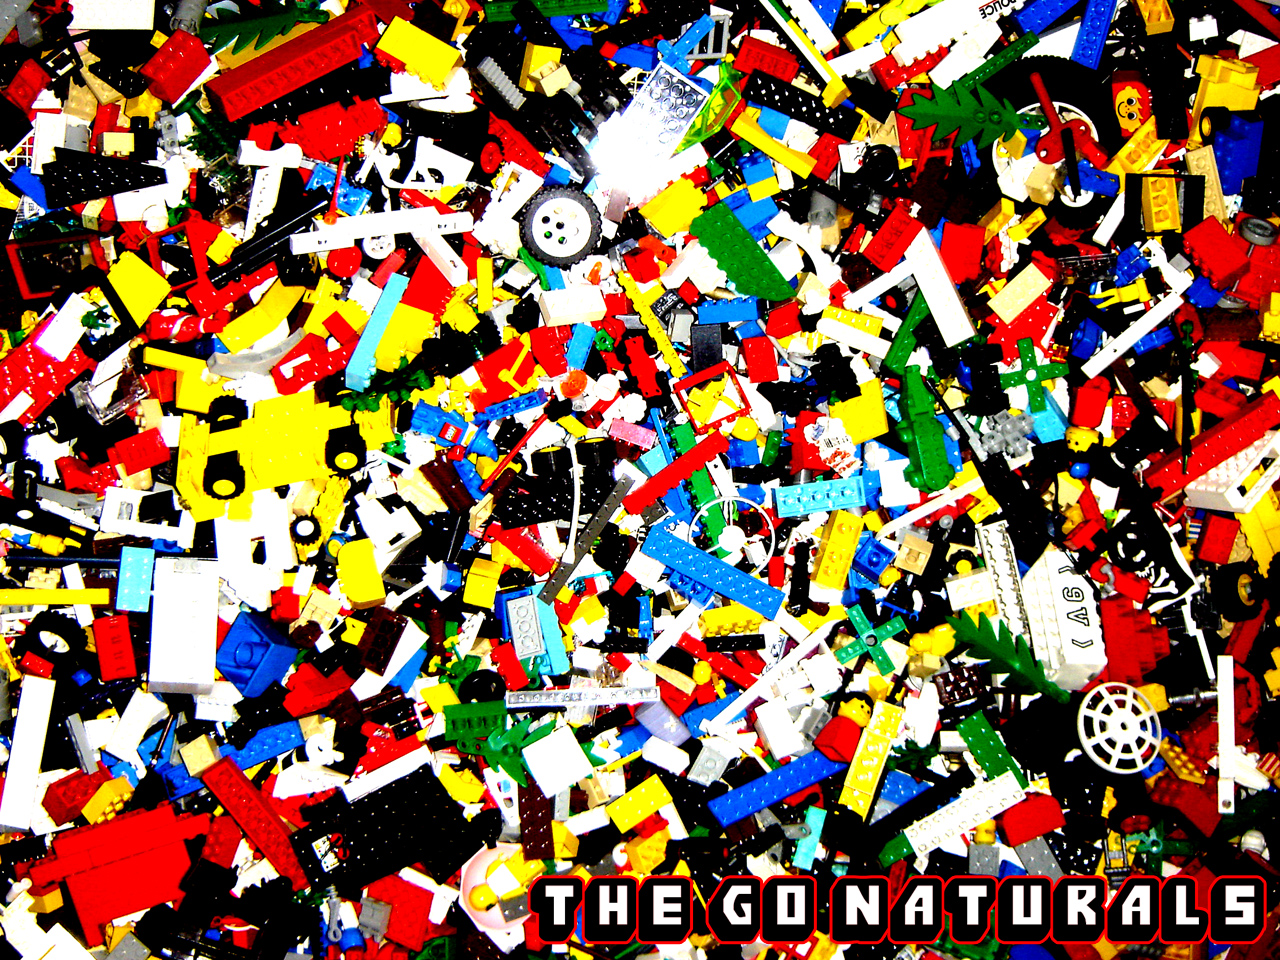  Coders Wallpaper Abyss Explore the Collection Lego Products Lego 4006 1280x960